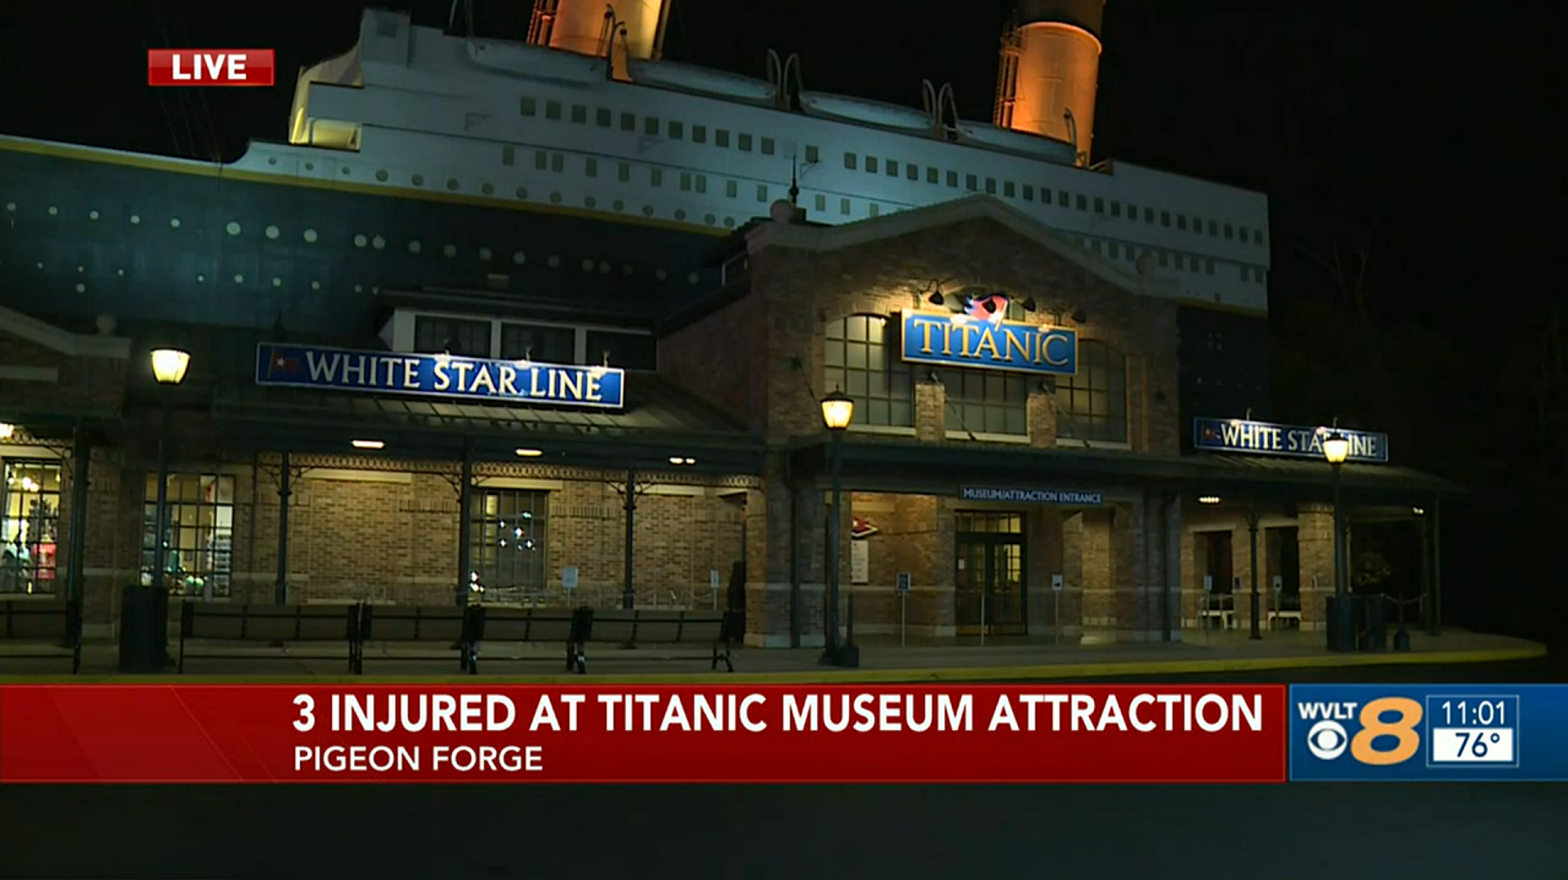 The Titanic Museum Attraction in Pigeon Forge, Tennessee, where three people were injured on Monday due to a metaphor. (Screenshot: WVLT 8 via KKTV 11, Fair Use)